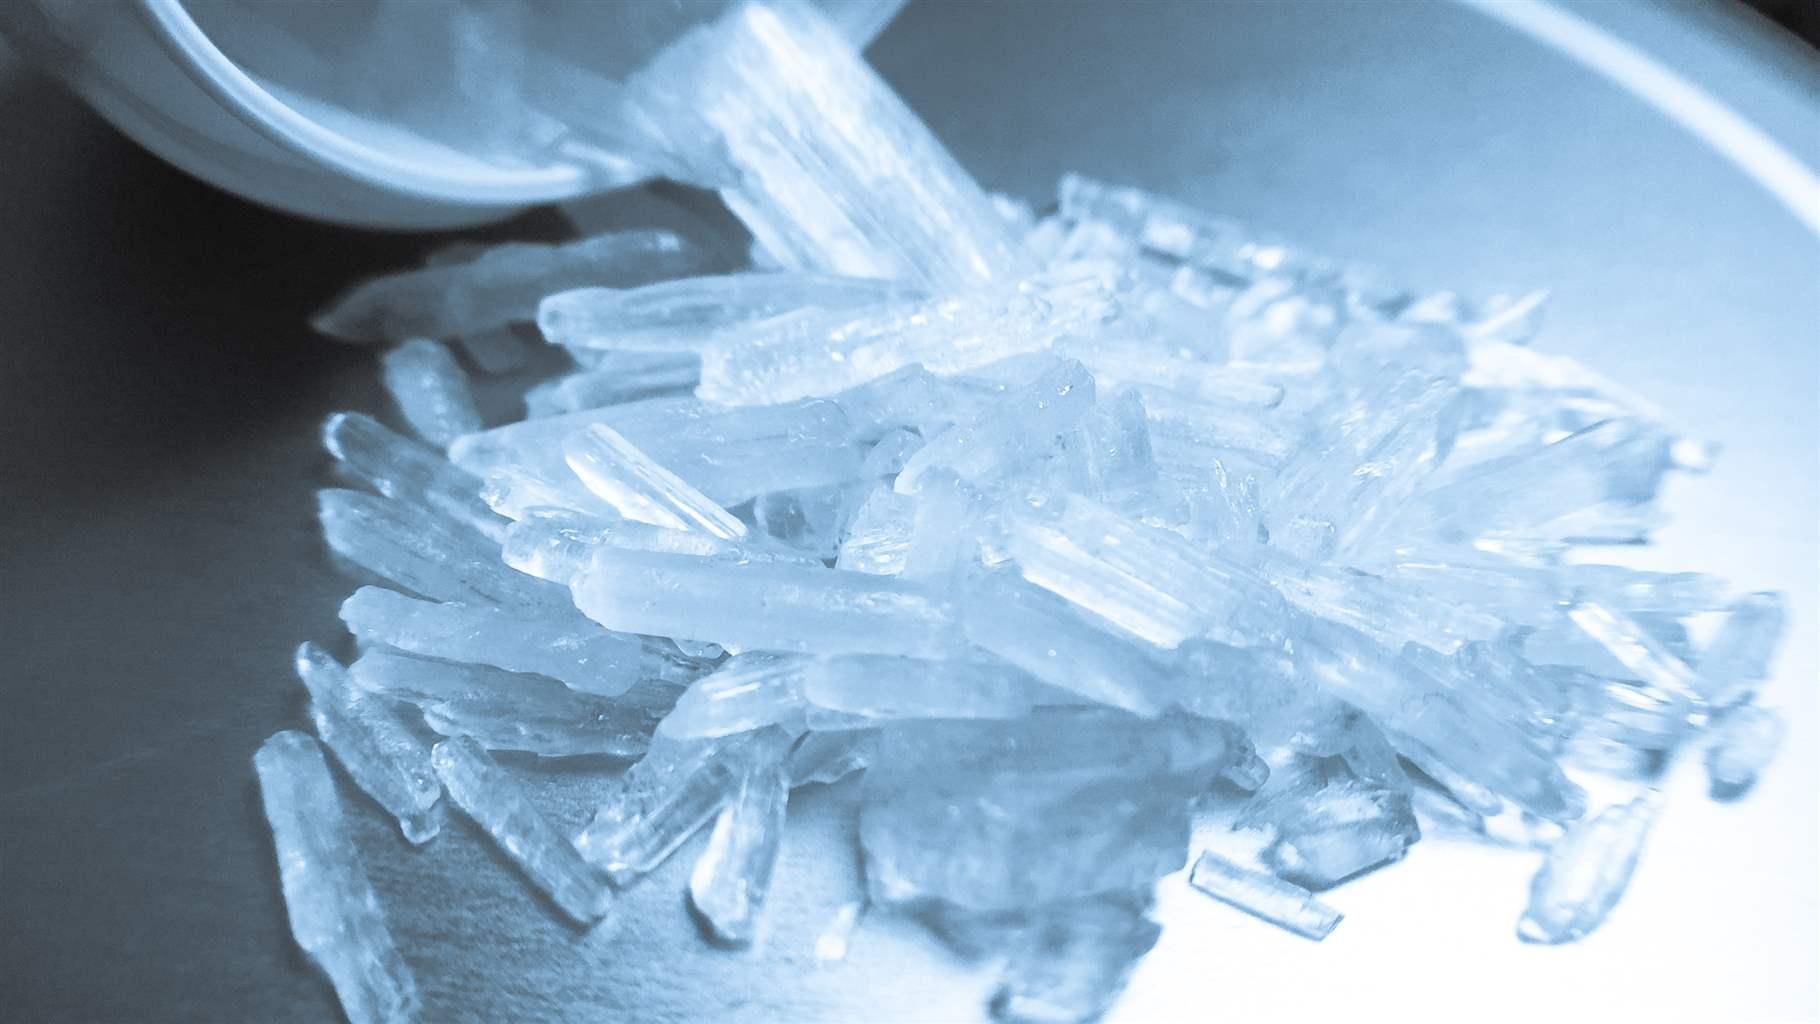 Recognizing Signs Of Methamphetamine Use Through Appearance